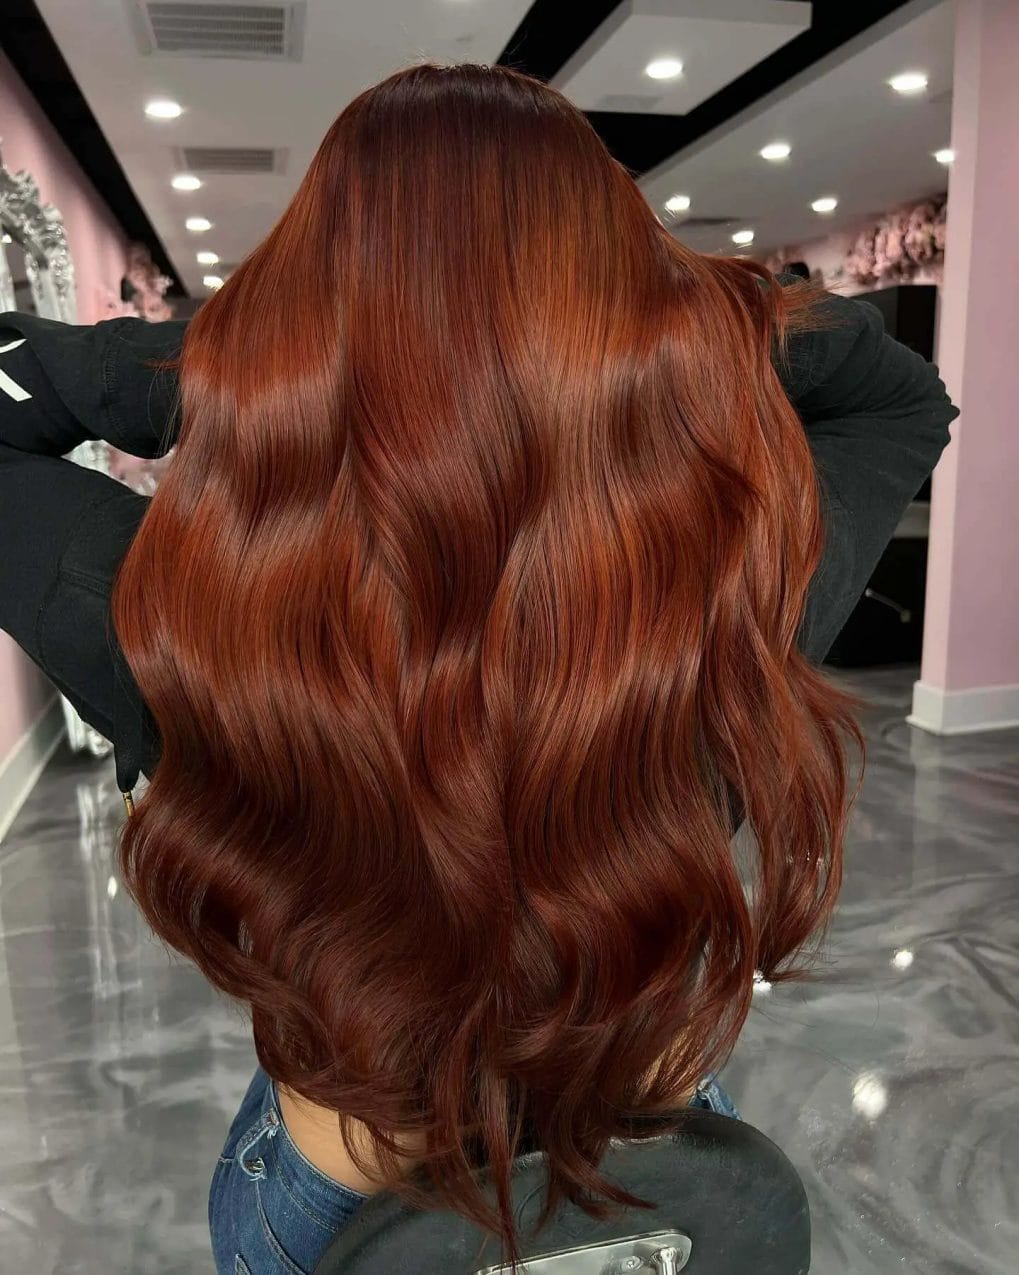 Dark copper roots blending into glossy auburn waves with Hollywood style curls.